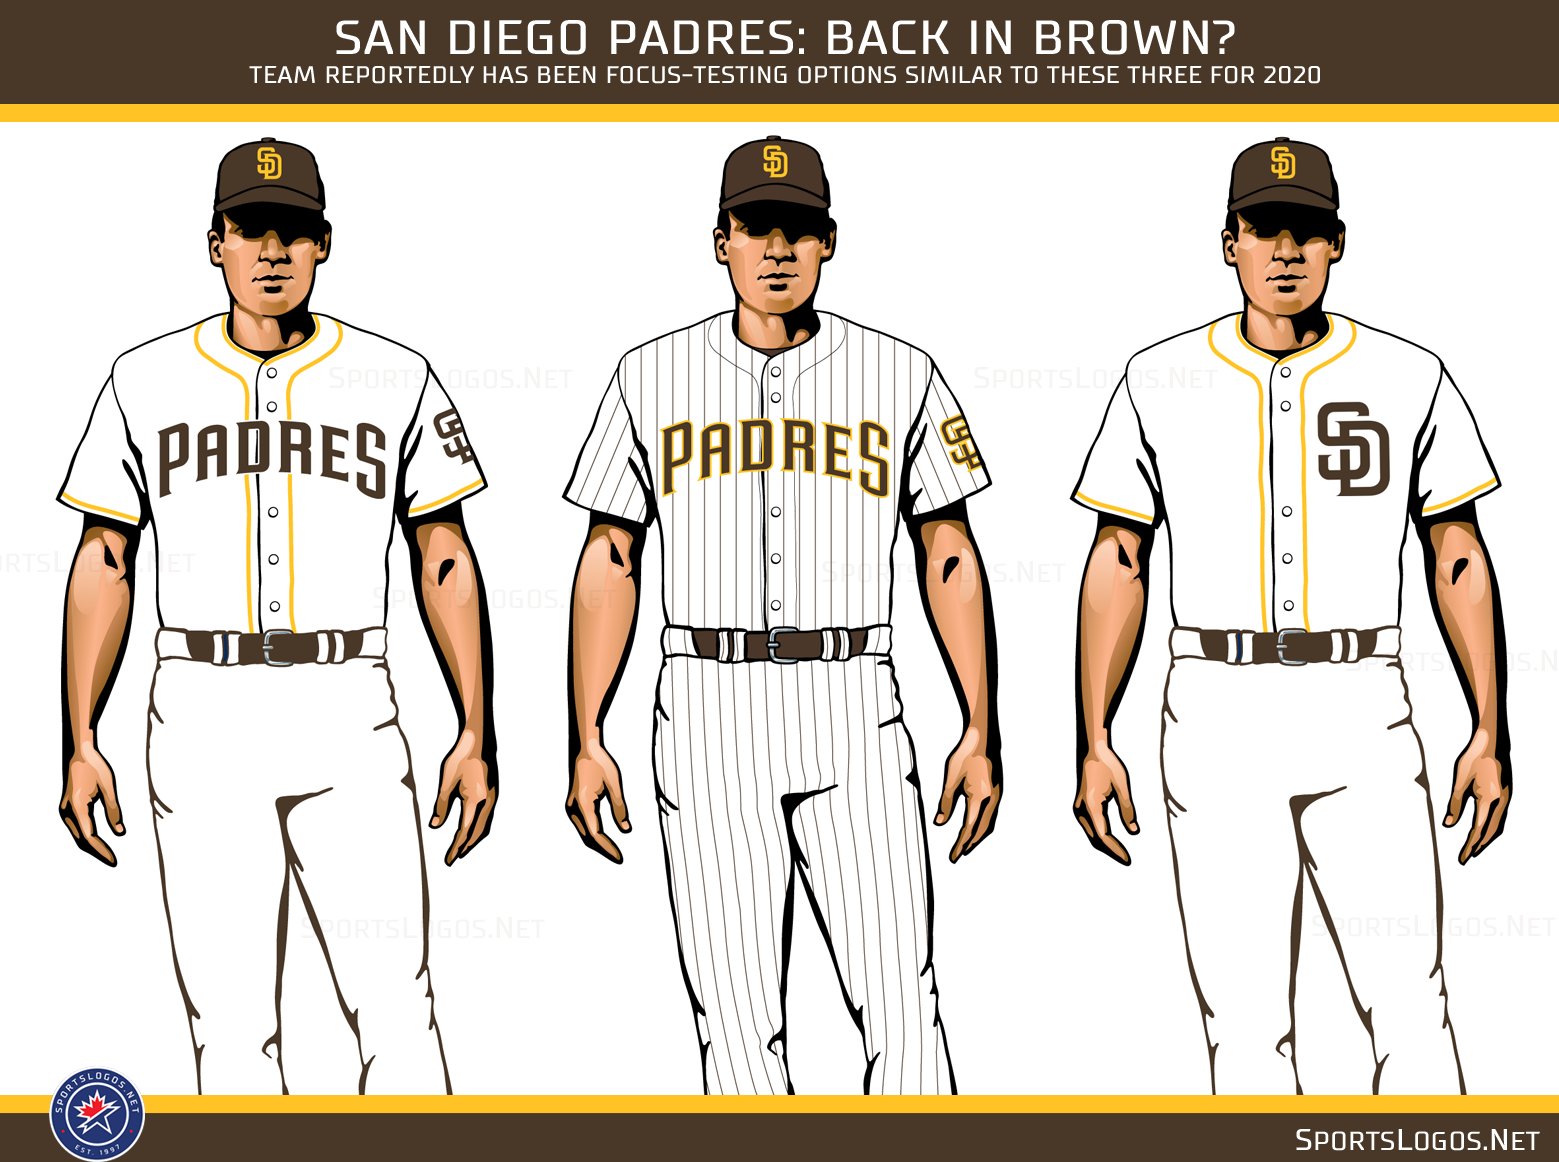 Chris Creamer  SportsLogos.Net on X: The San Diego Padres are  focus-testing several uniform options for the 2020 season, all of which use  a brown-and-gold colour scheme. Much more details here